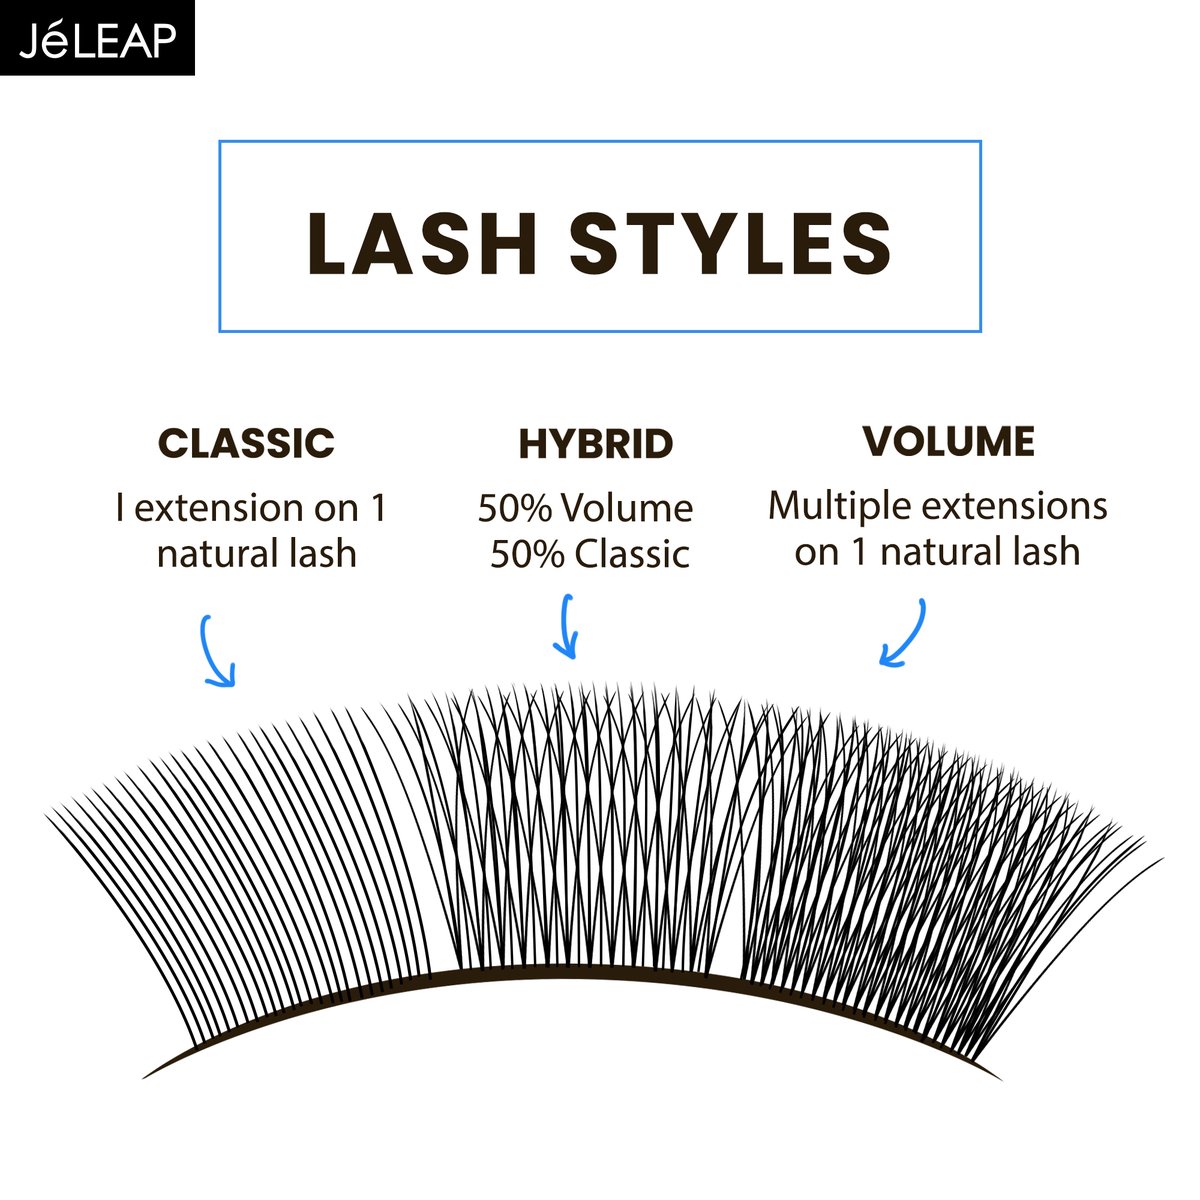 Here’s a side-by-side comparison of different lash styles! 💕

Share with your clients to help them understand the lashes used for each style! 😊

#eyelash #nyclashtech #usawomen #lashtech #lashartist #lashclass #lashextensions #hybridlashes #ukwomen #lashextensions #lash #lashes